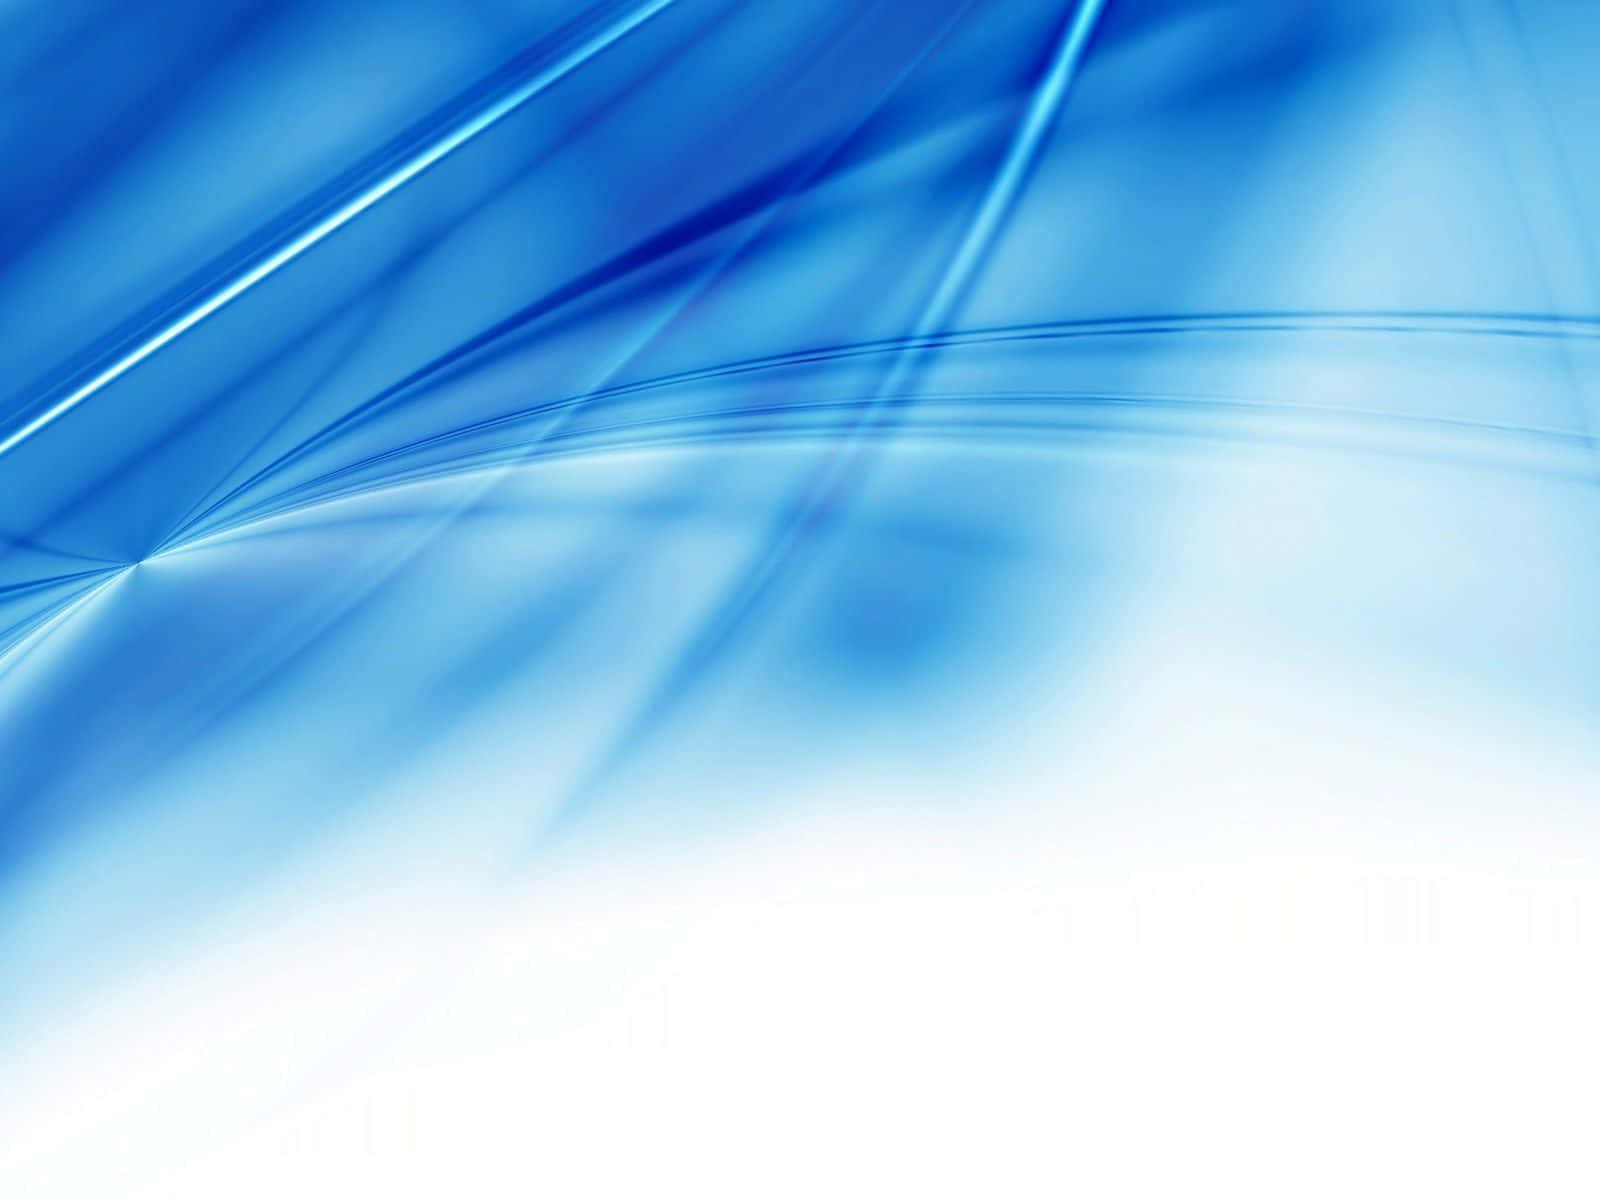 Diving Deep in the Blue - Zoom Virtual Background